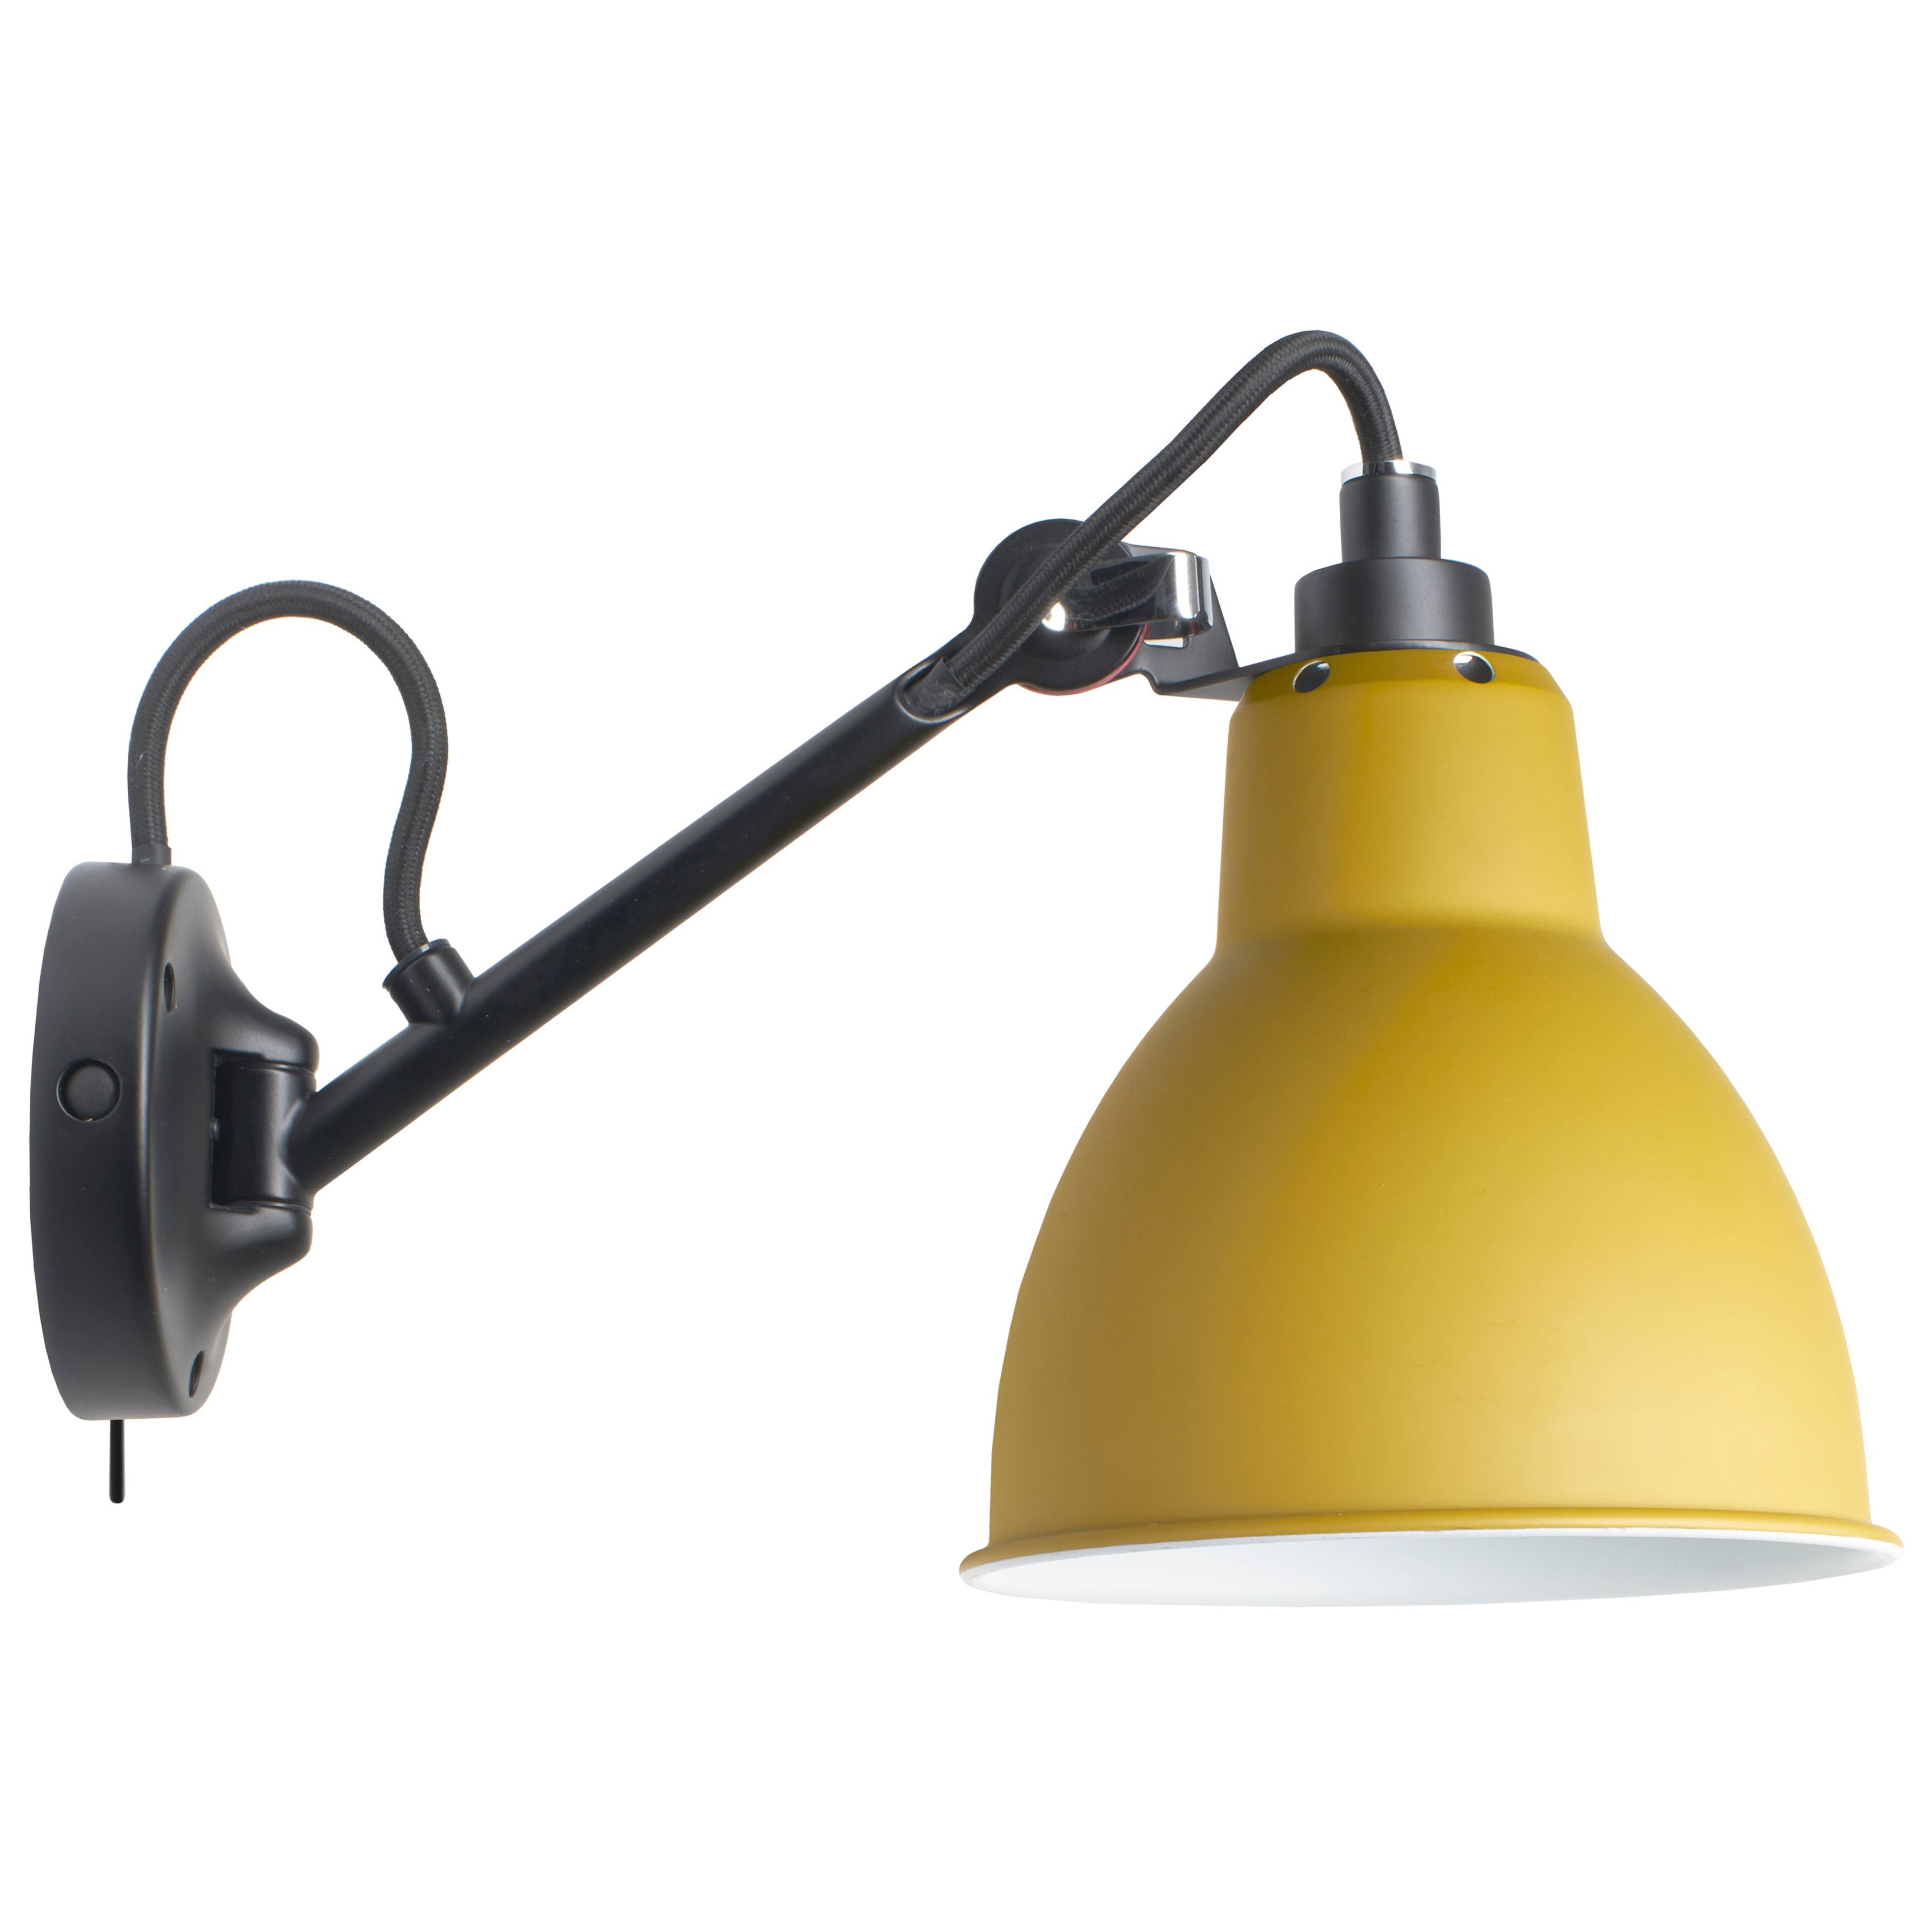 DCW Editions La Lampe Gras N°104 SW Wall Lamp in Black Arm and Yellow Shade